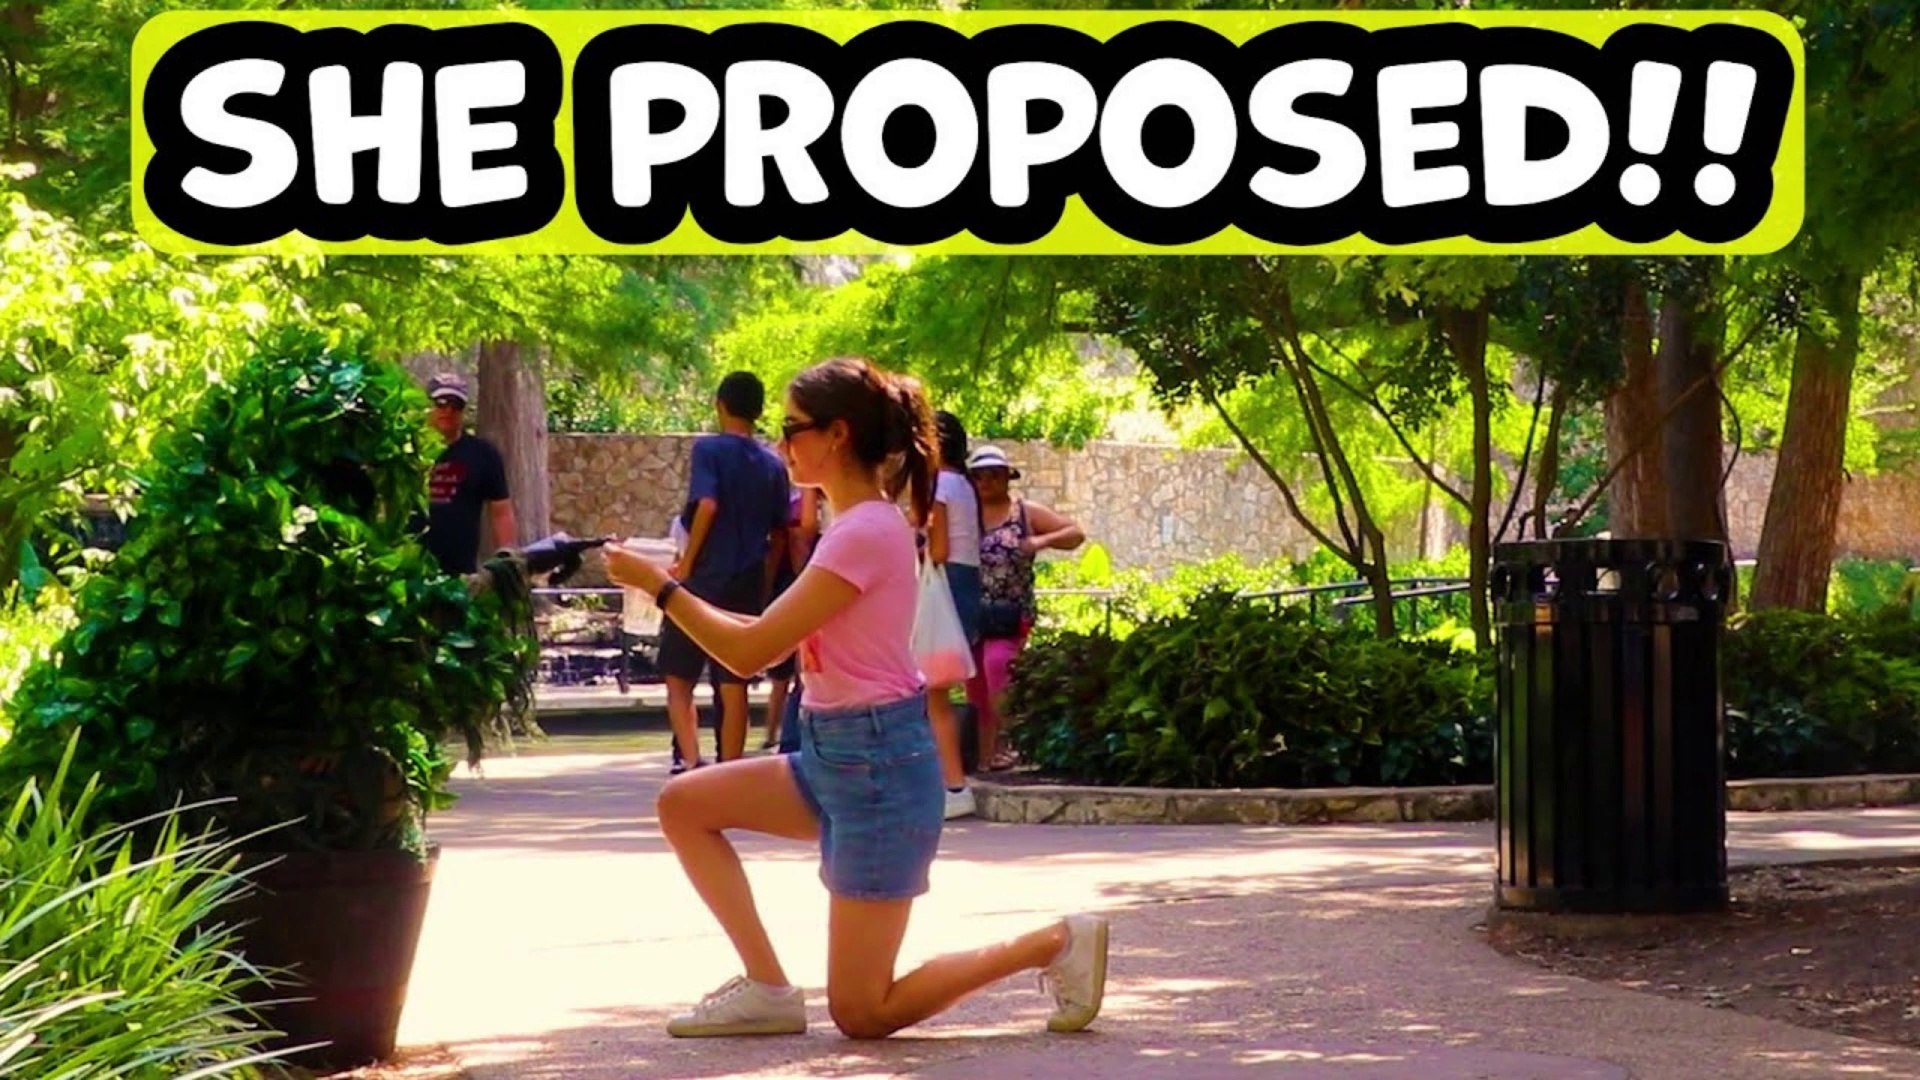 Today Top Story Bushman Prank: She Proposed to me!! 2022!